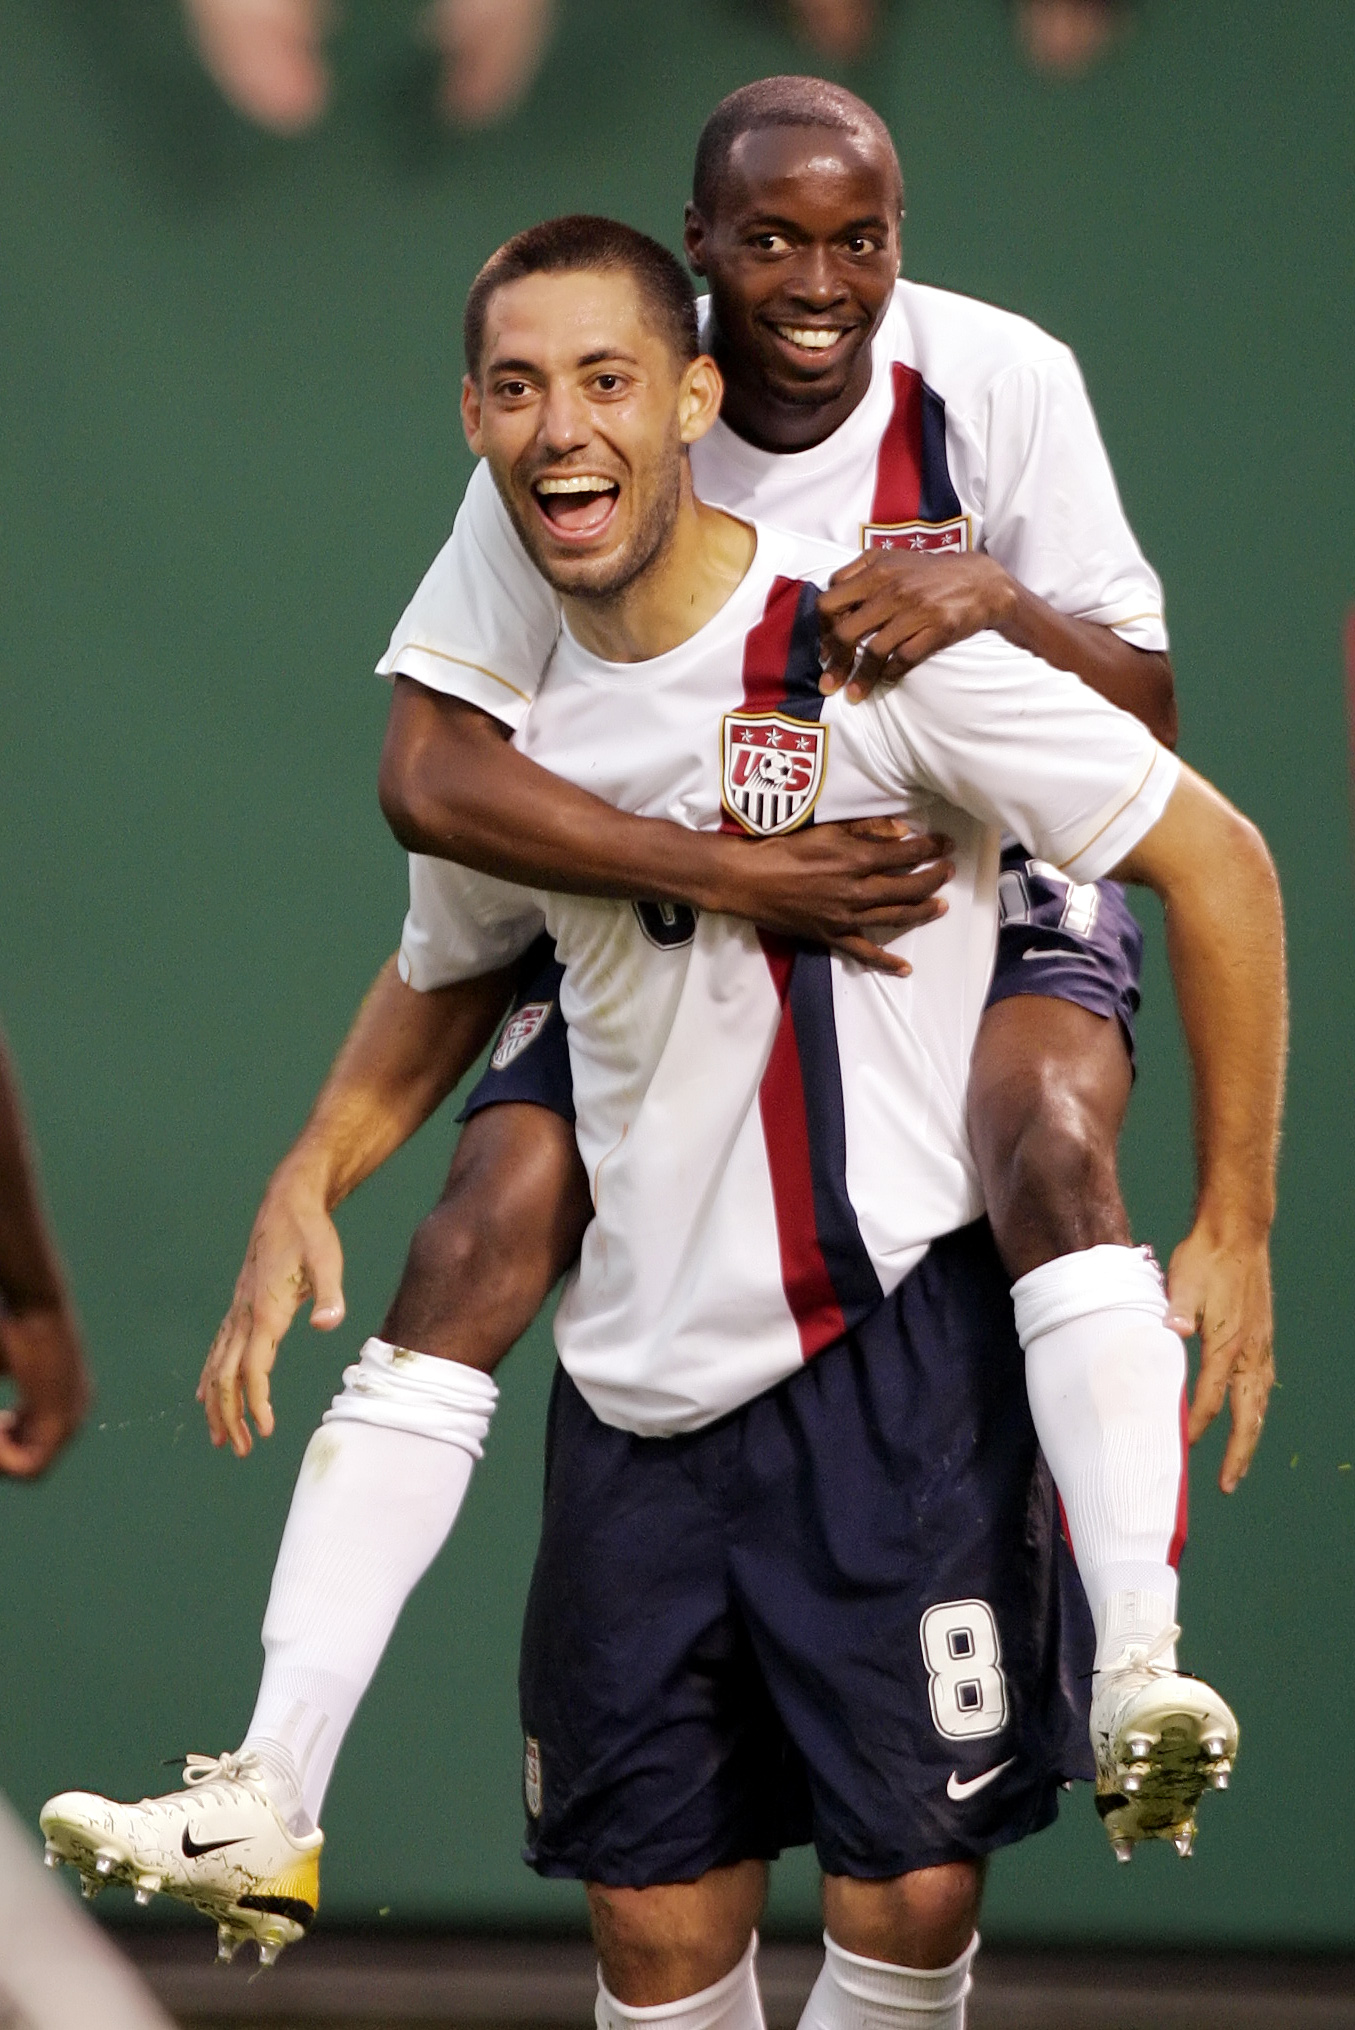 World Cup 2010: USA ready to cast off underdog tag, says Clint Dempsey, USA